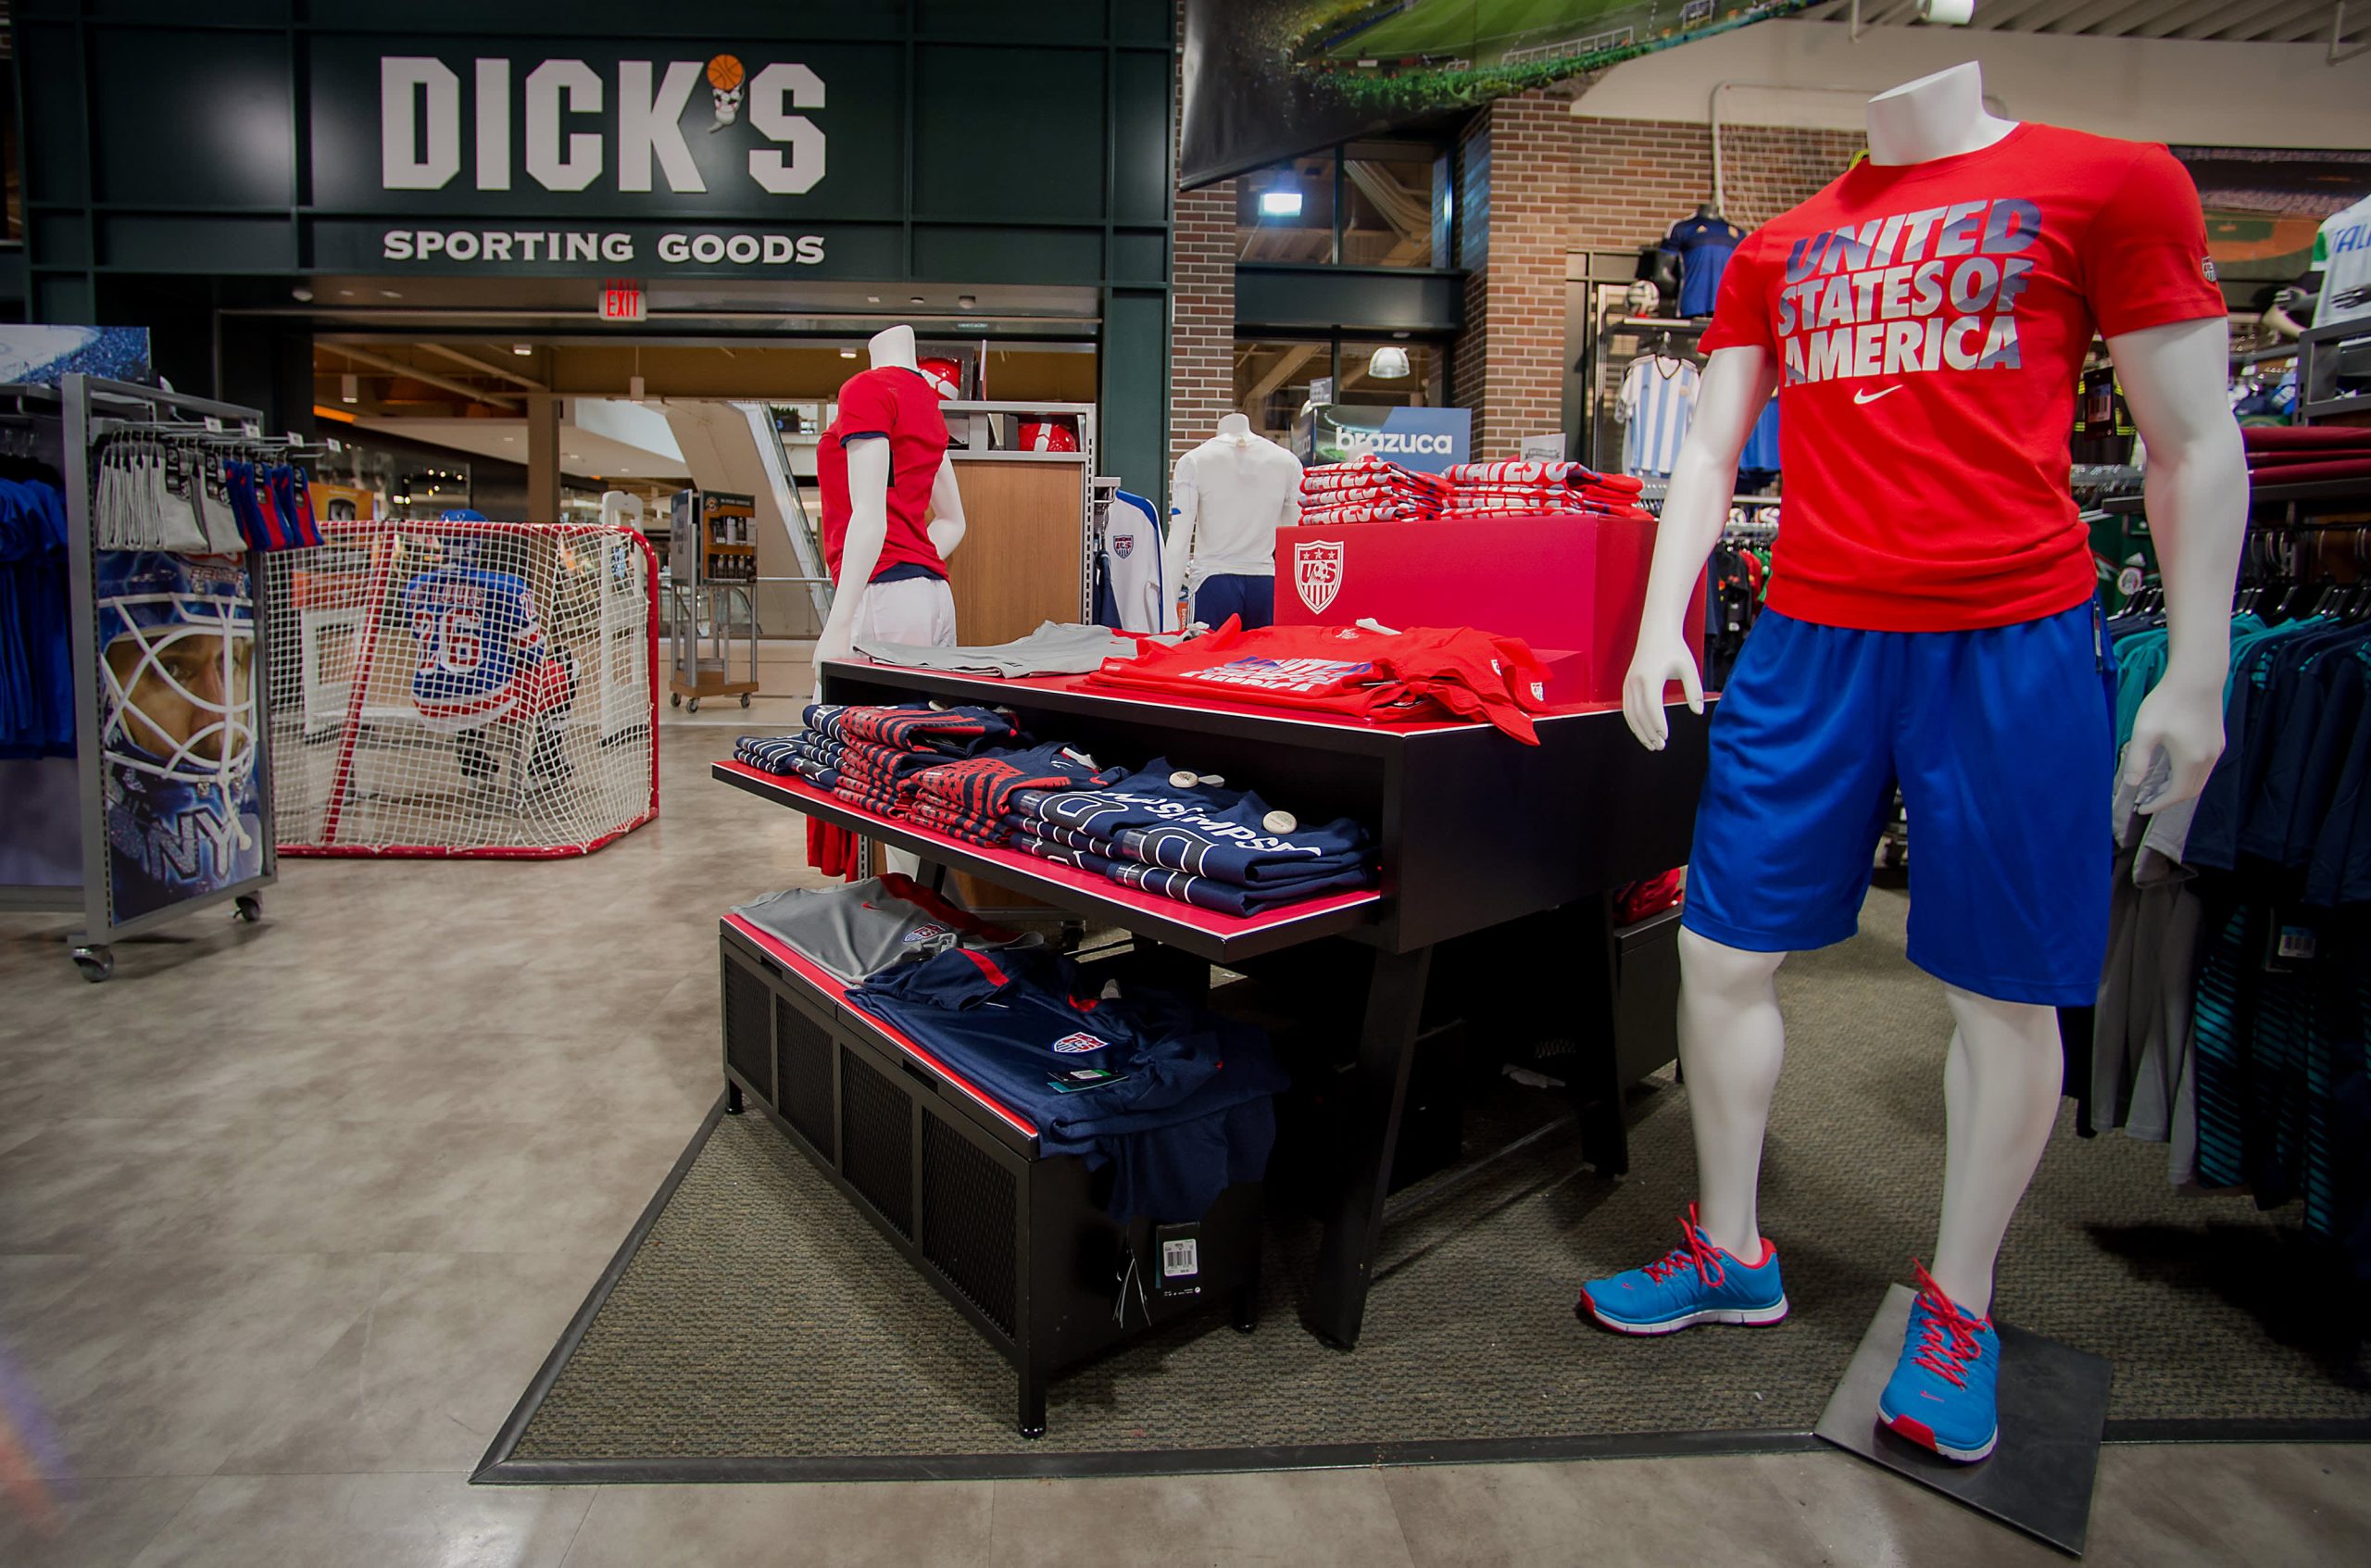 Dick’s Sporting Items picks Instacart for same-day supply